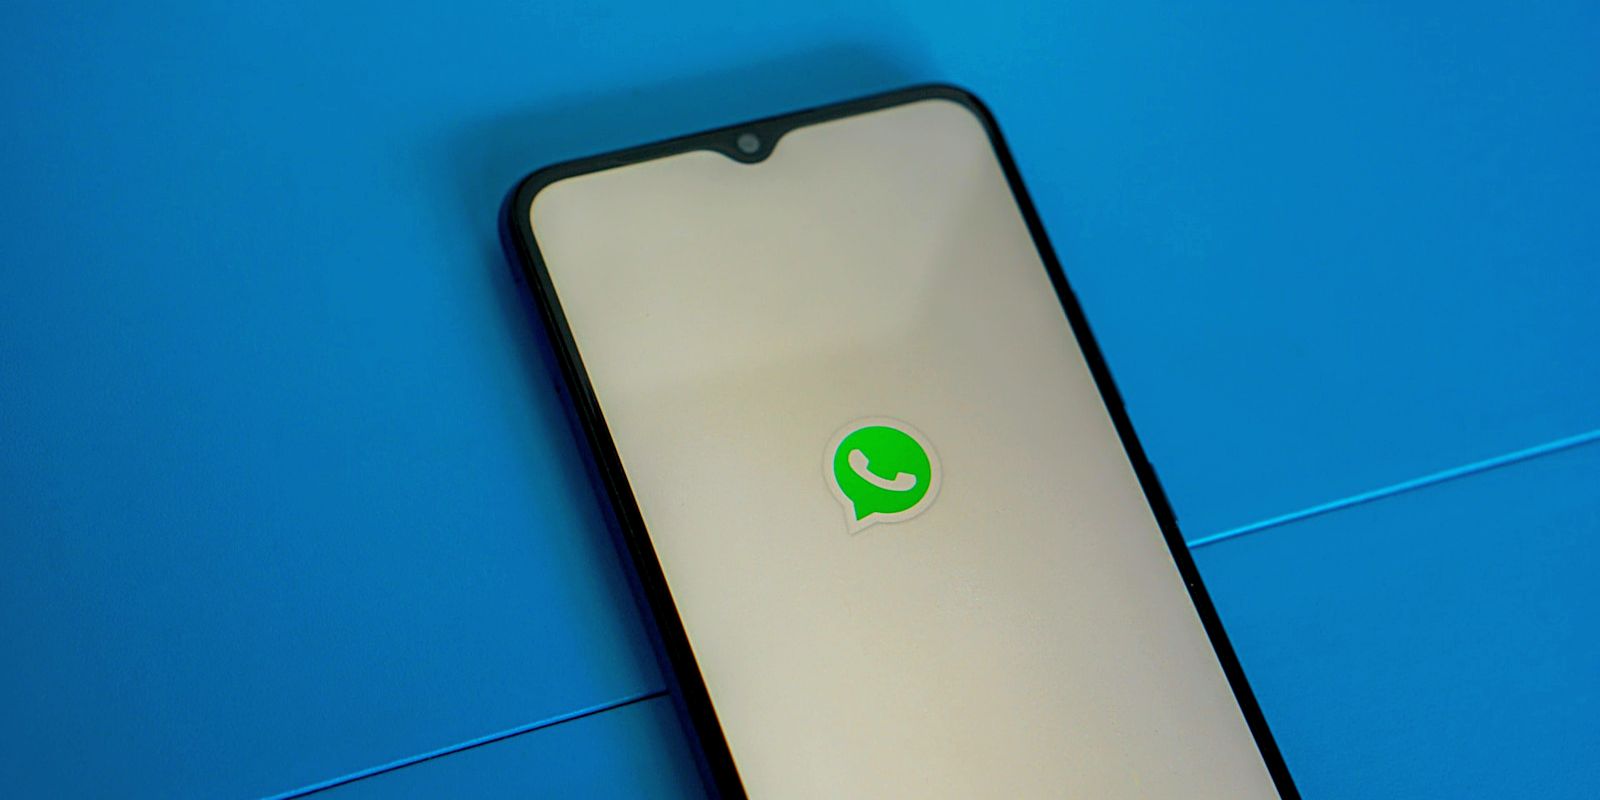 Whatsapp To Bring All-New Design For Android Users In A New Update